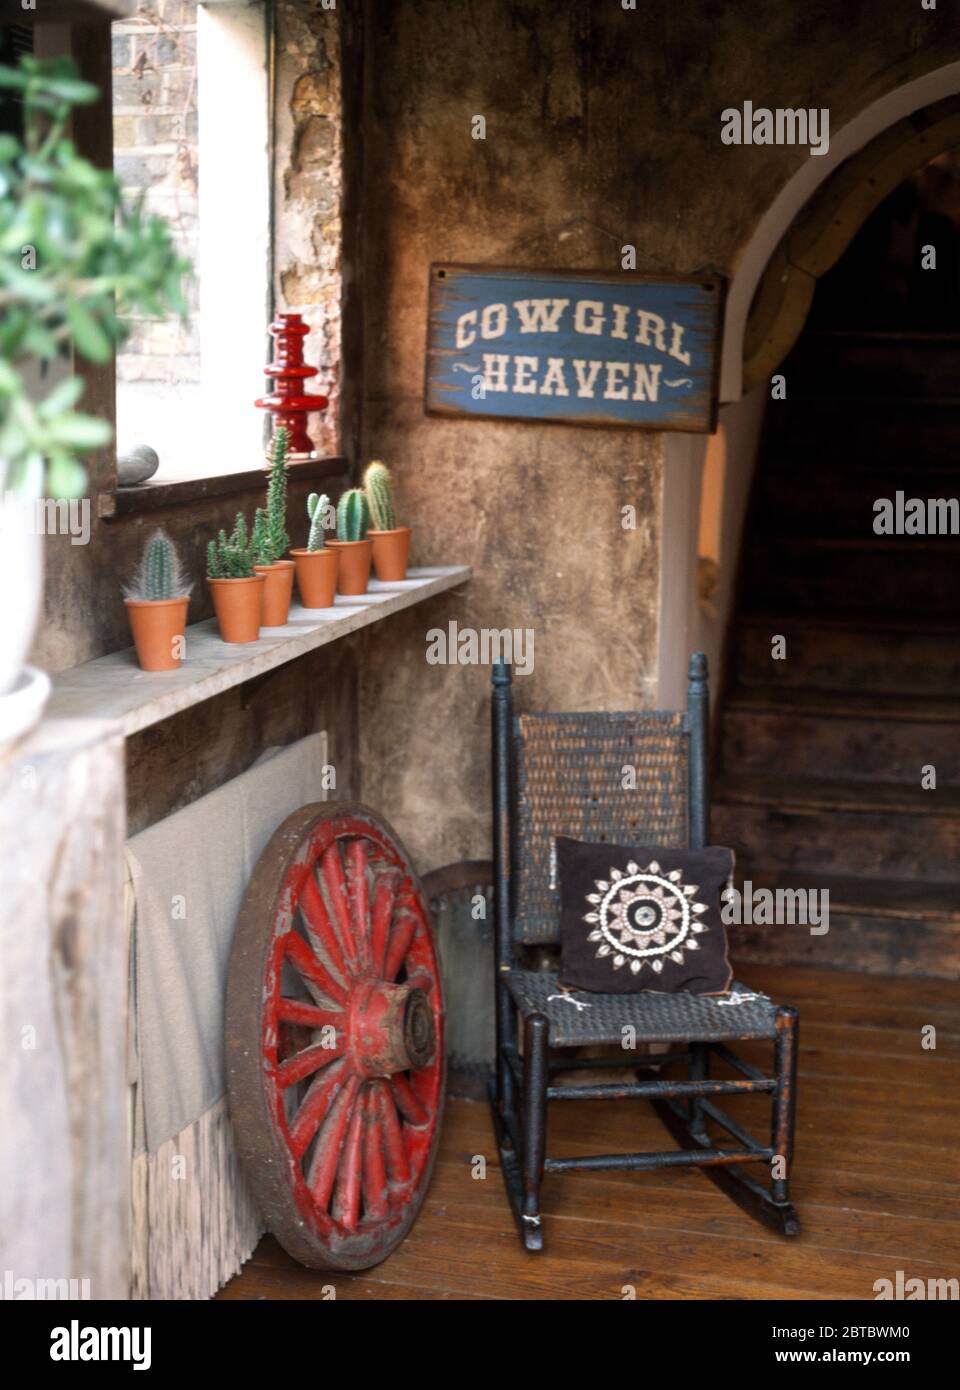 Pots of cacti on shelf above rocking chair in dated hall Stock Photo